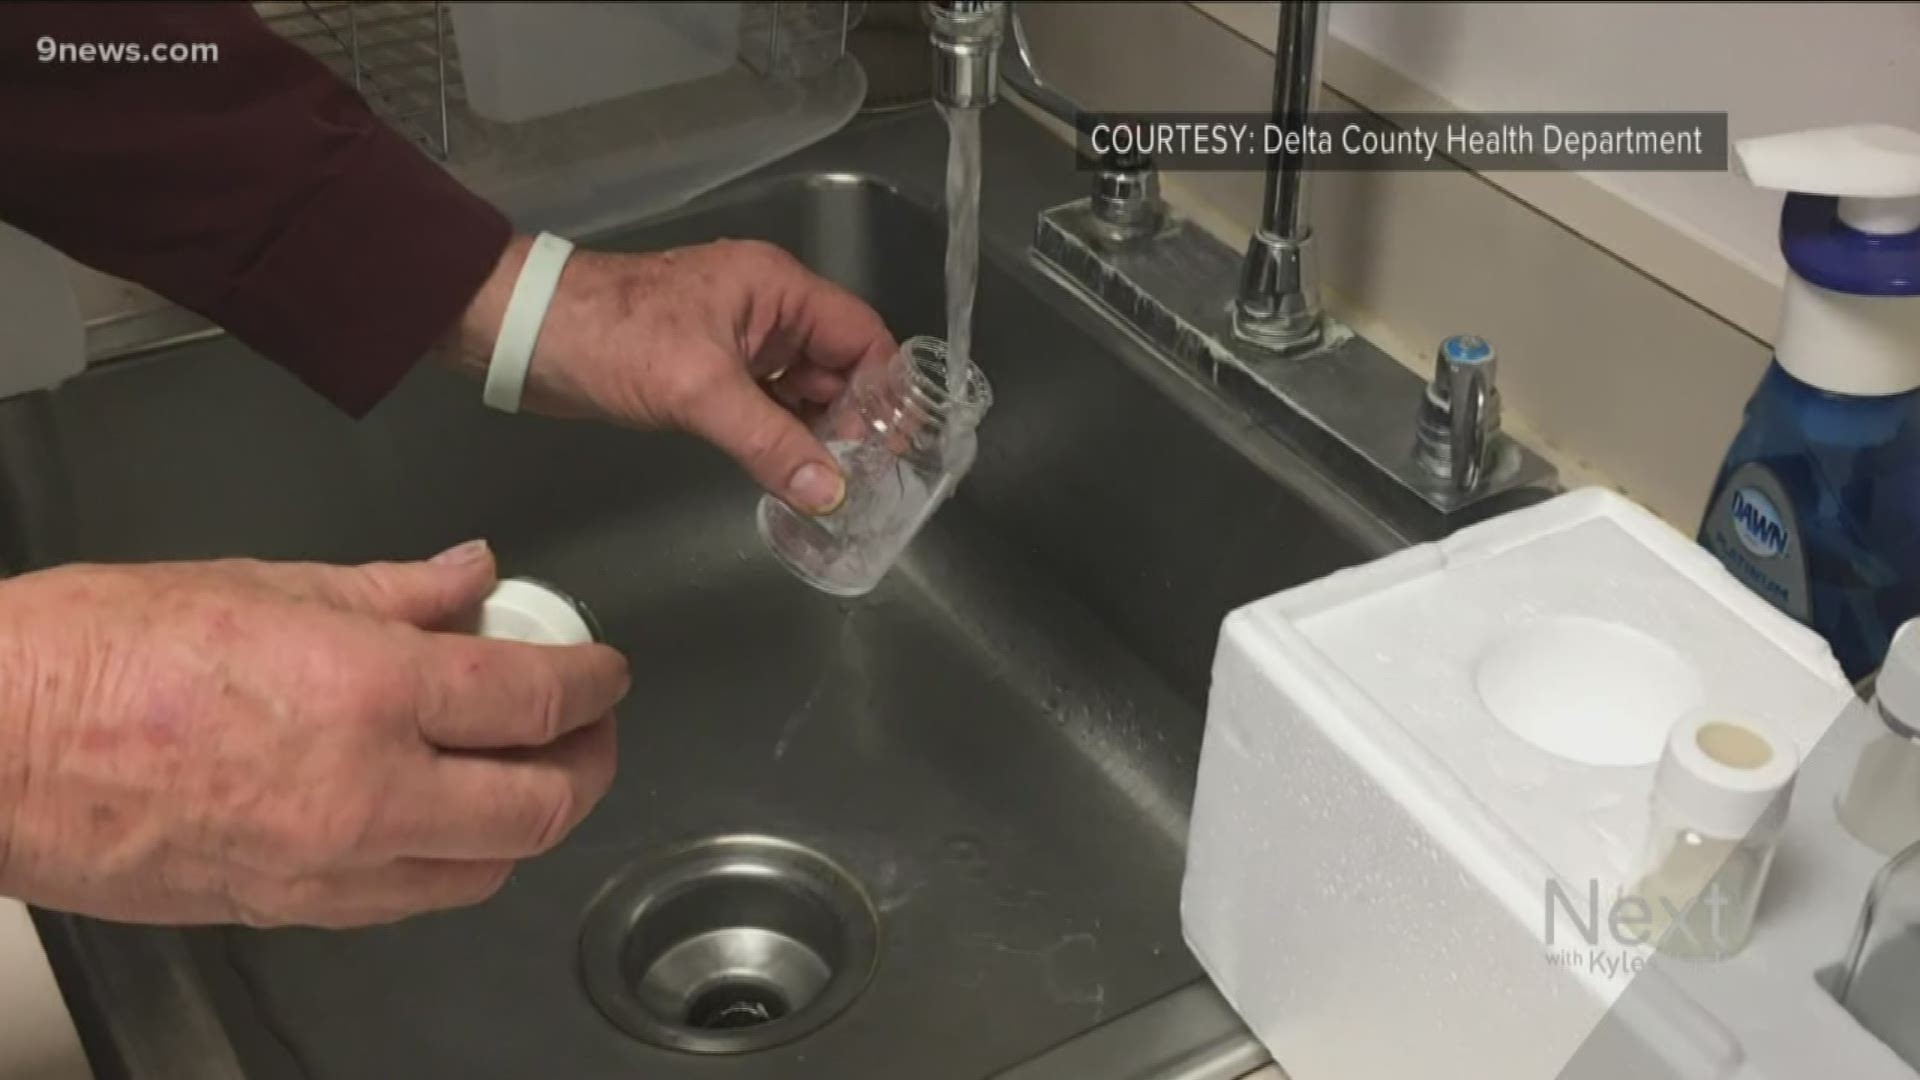 The Delta County Health Department wants to make sure people are drinking safe water. After a recent study, they realized that's not always the case.